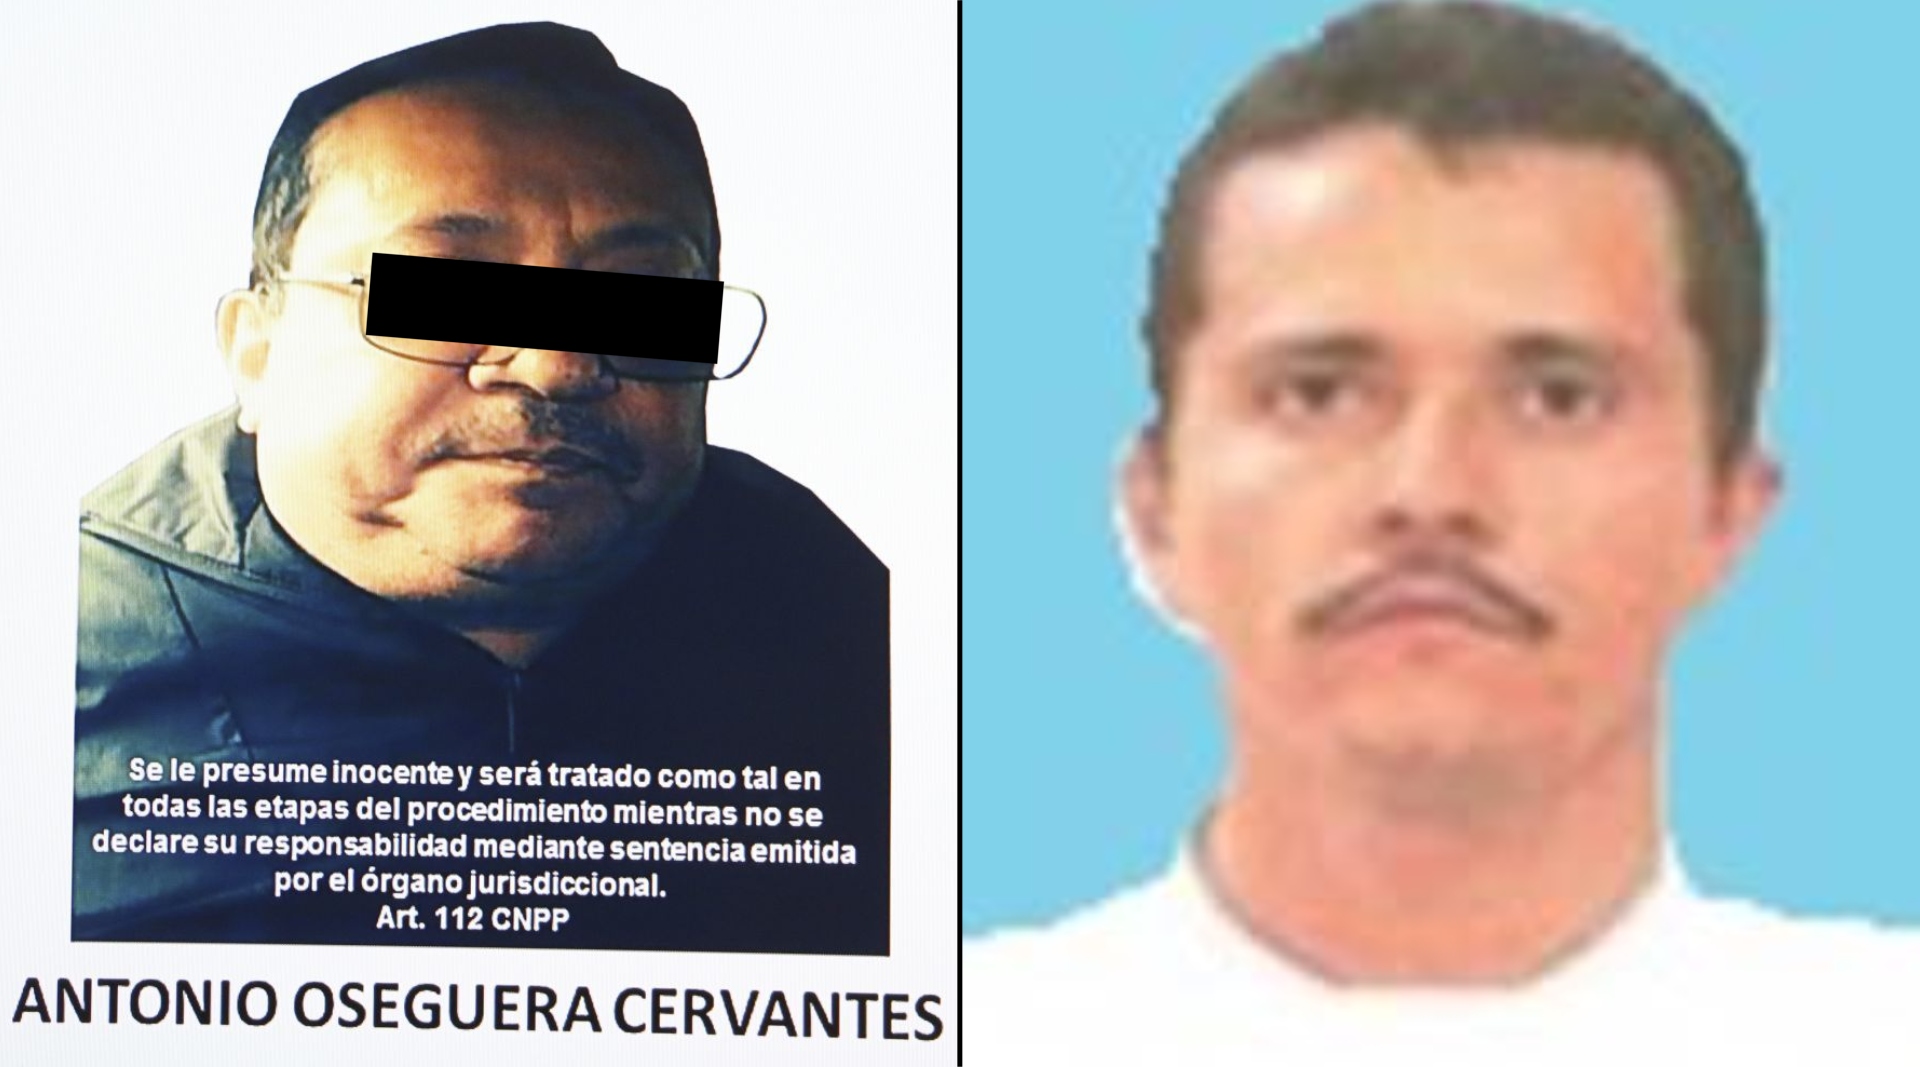 The CJNG is led by Nemesio Oseguera Cervantes, alias "the mencho" and is identified as a dangerous and prolific criminal group (Photo: Cuartoscuro/DEA)